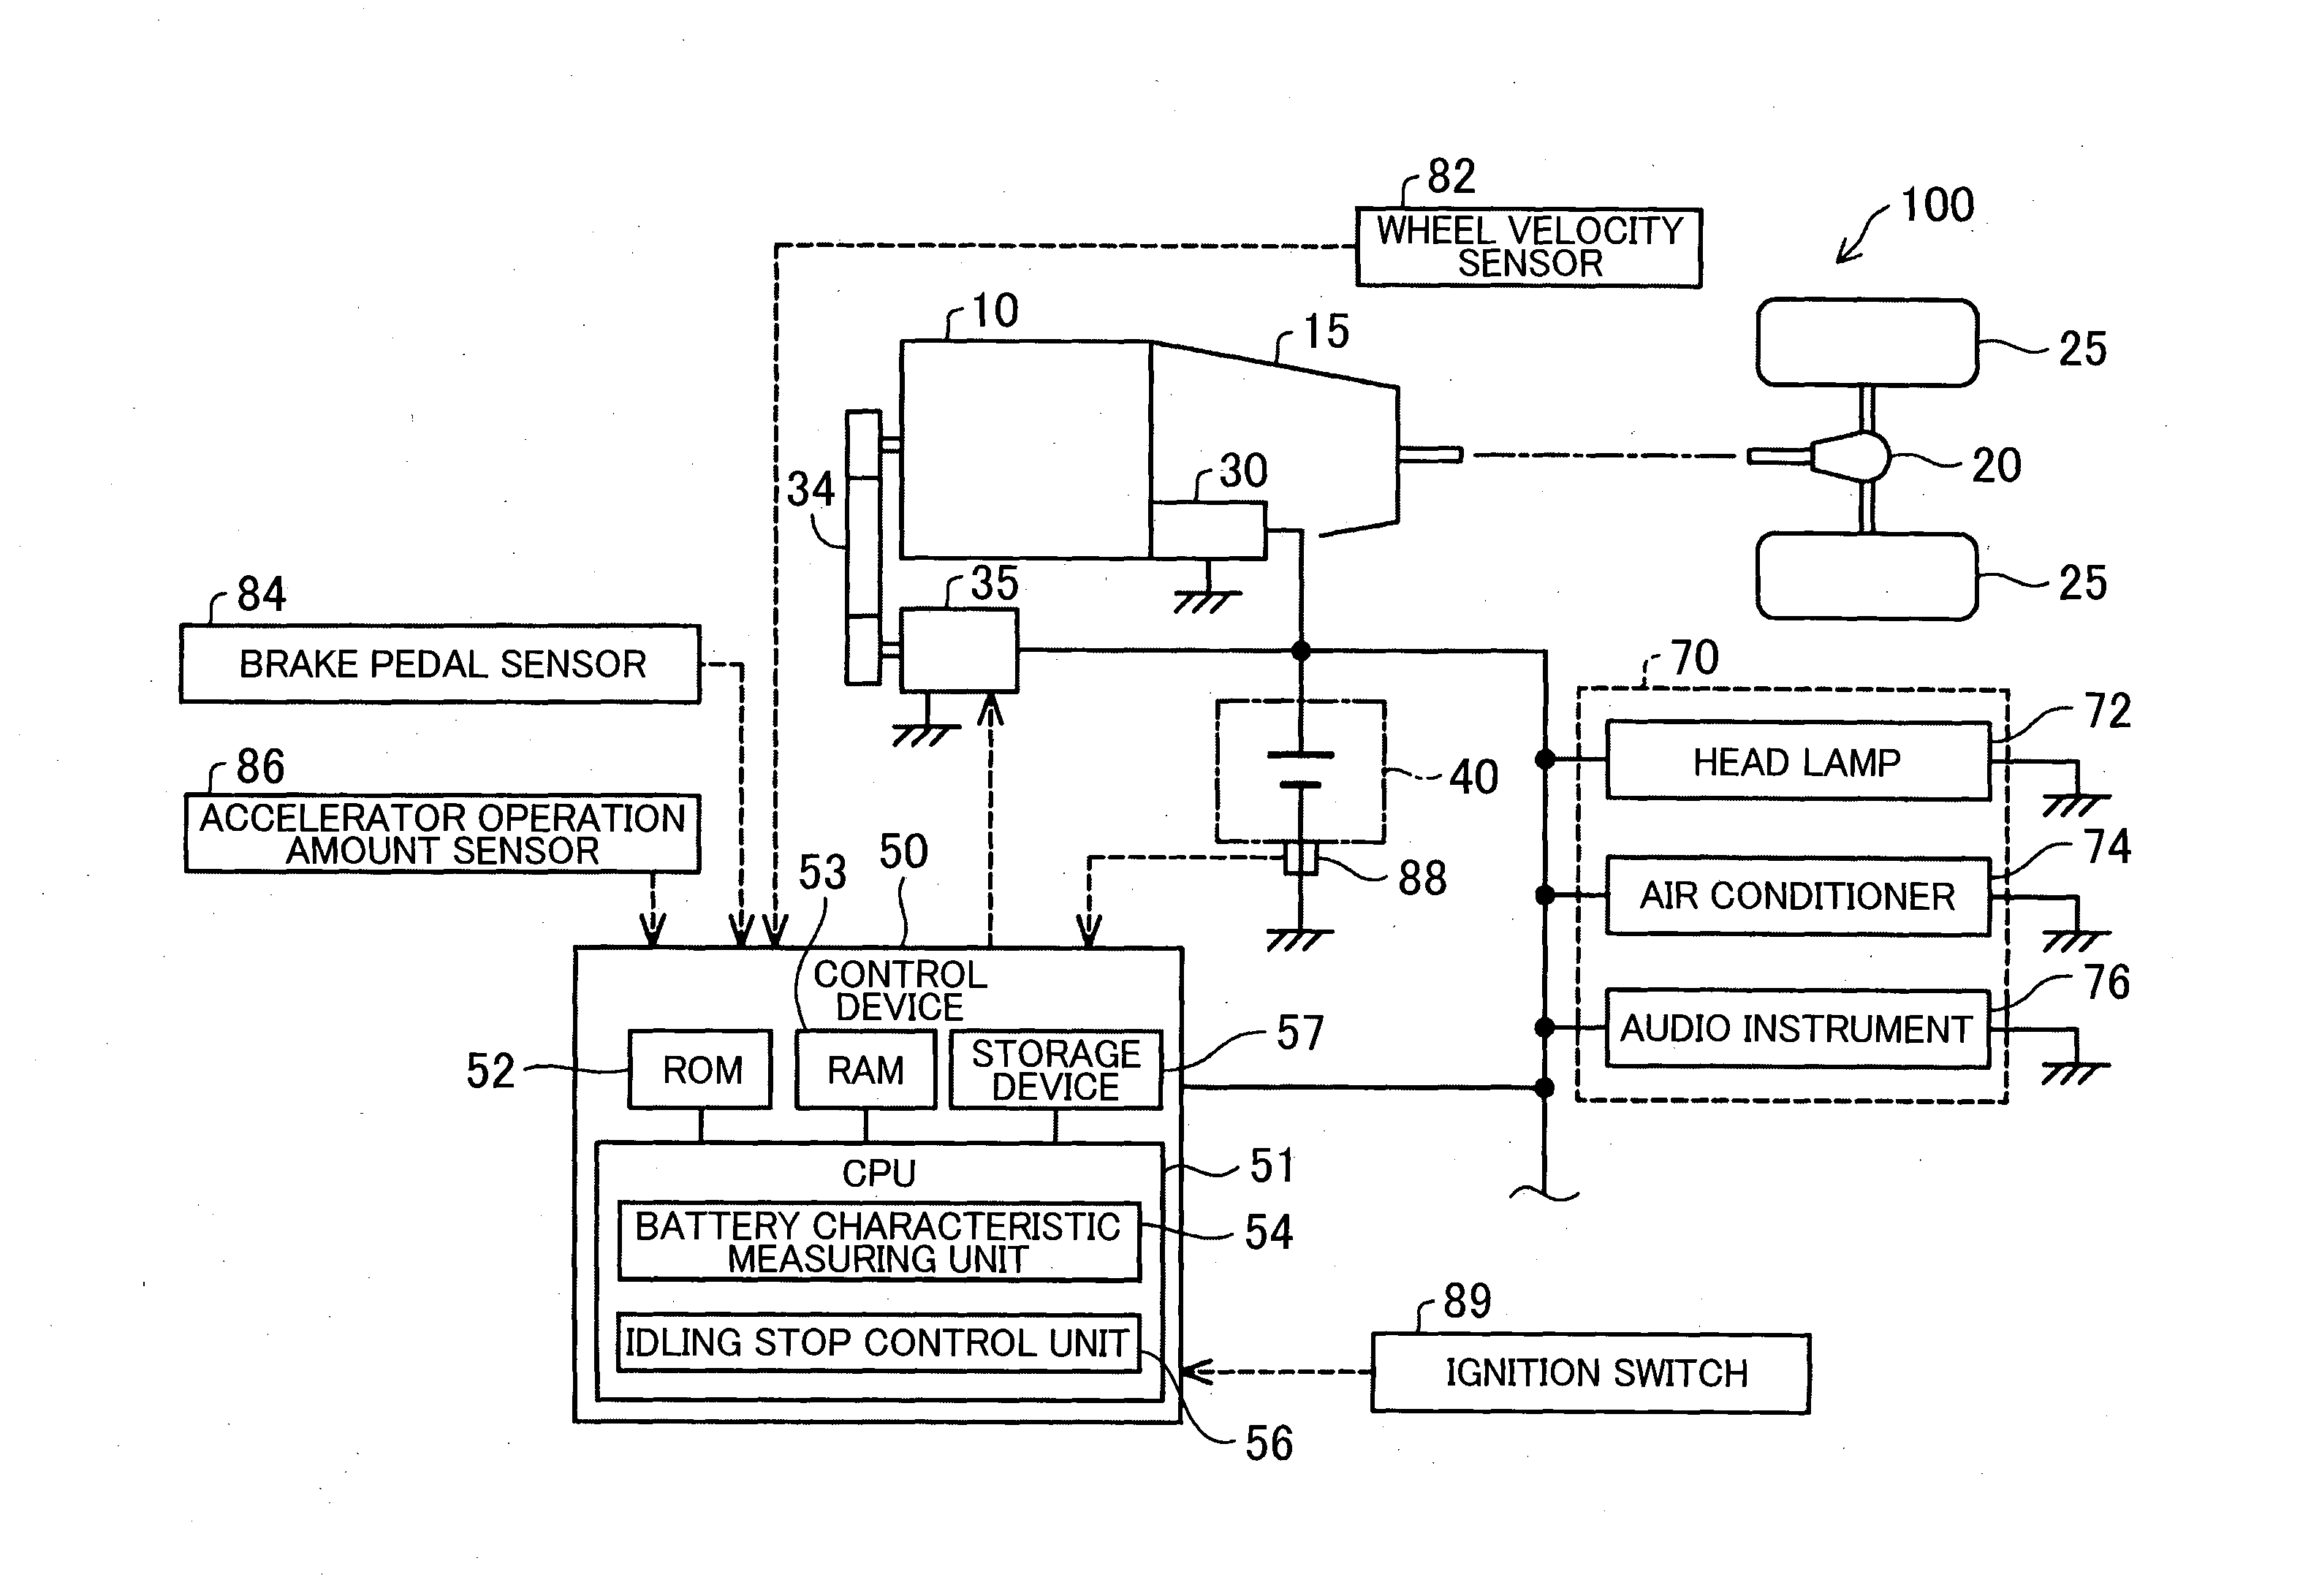 Control device for an internal combustion engine, vehicle including the same and method for the same